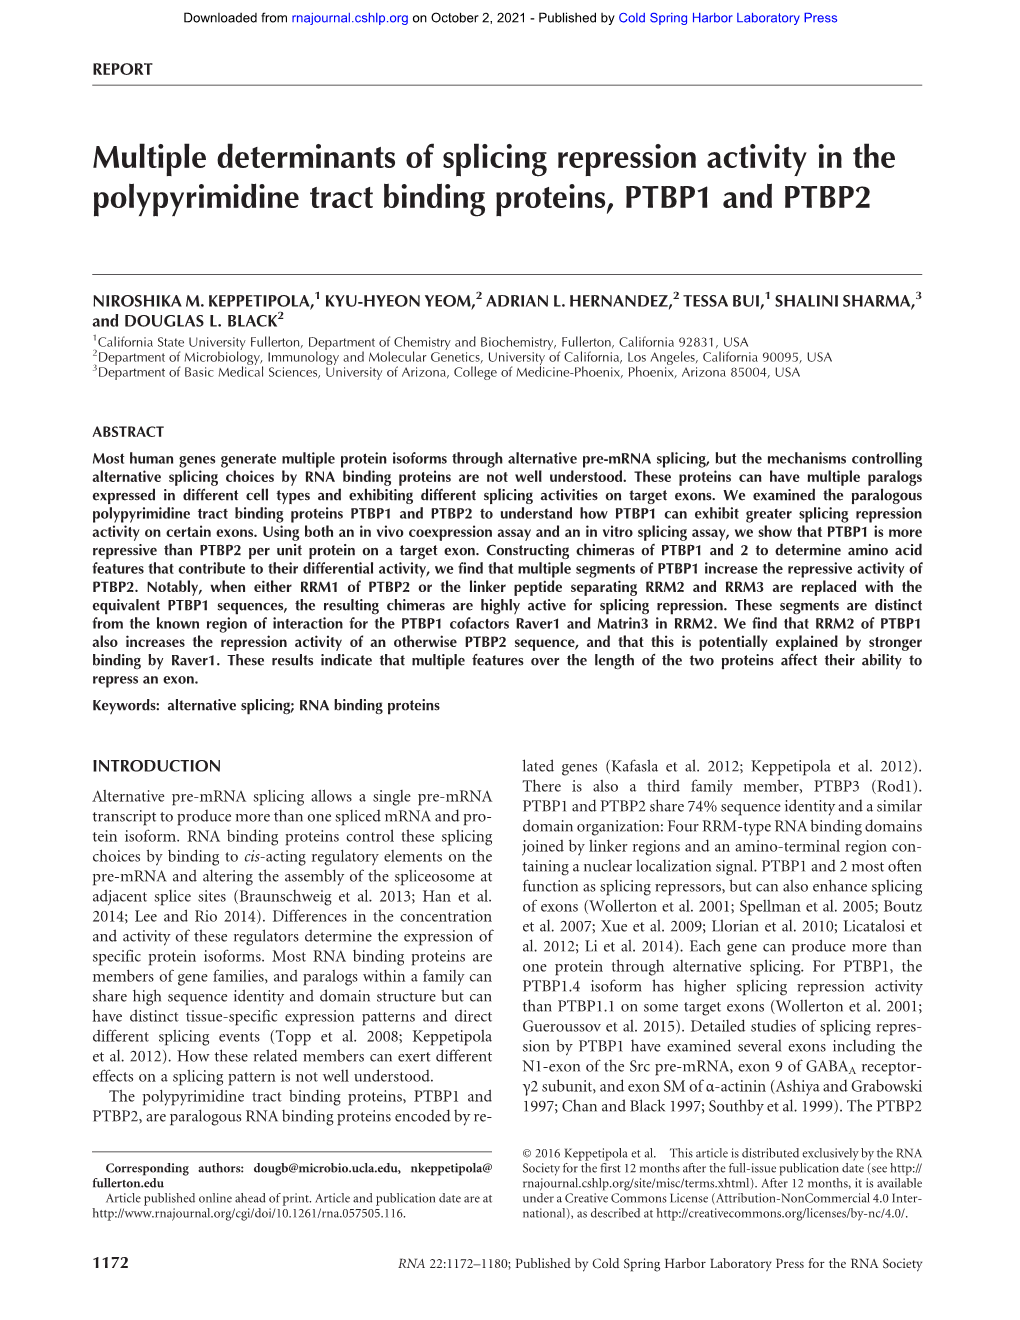 Multiple Determinants of Splicing Repression Activity in the Polypyrimidine Tract Binding Proteins, PTBP1 and PTBP2